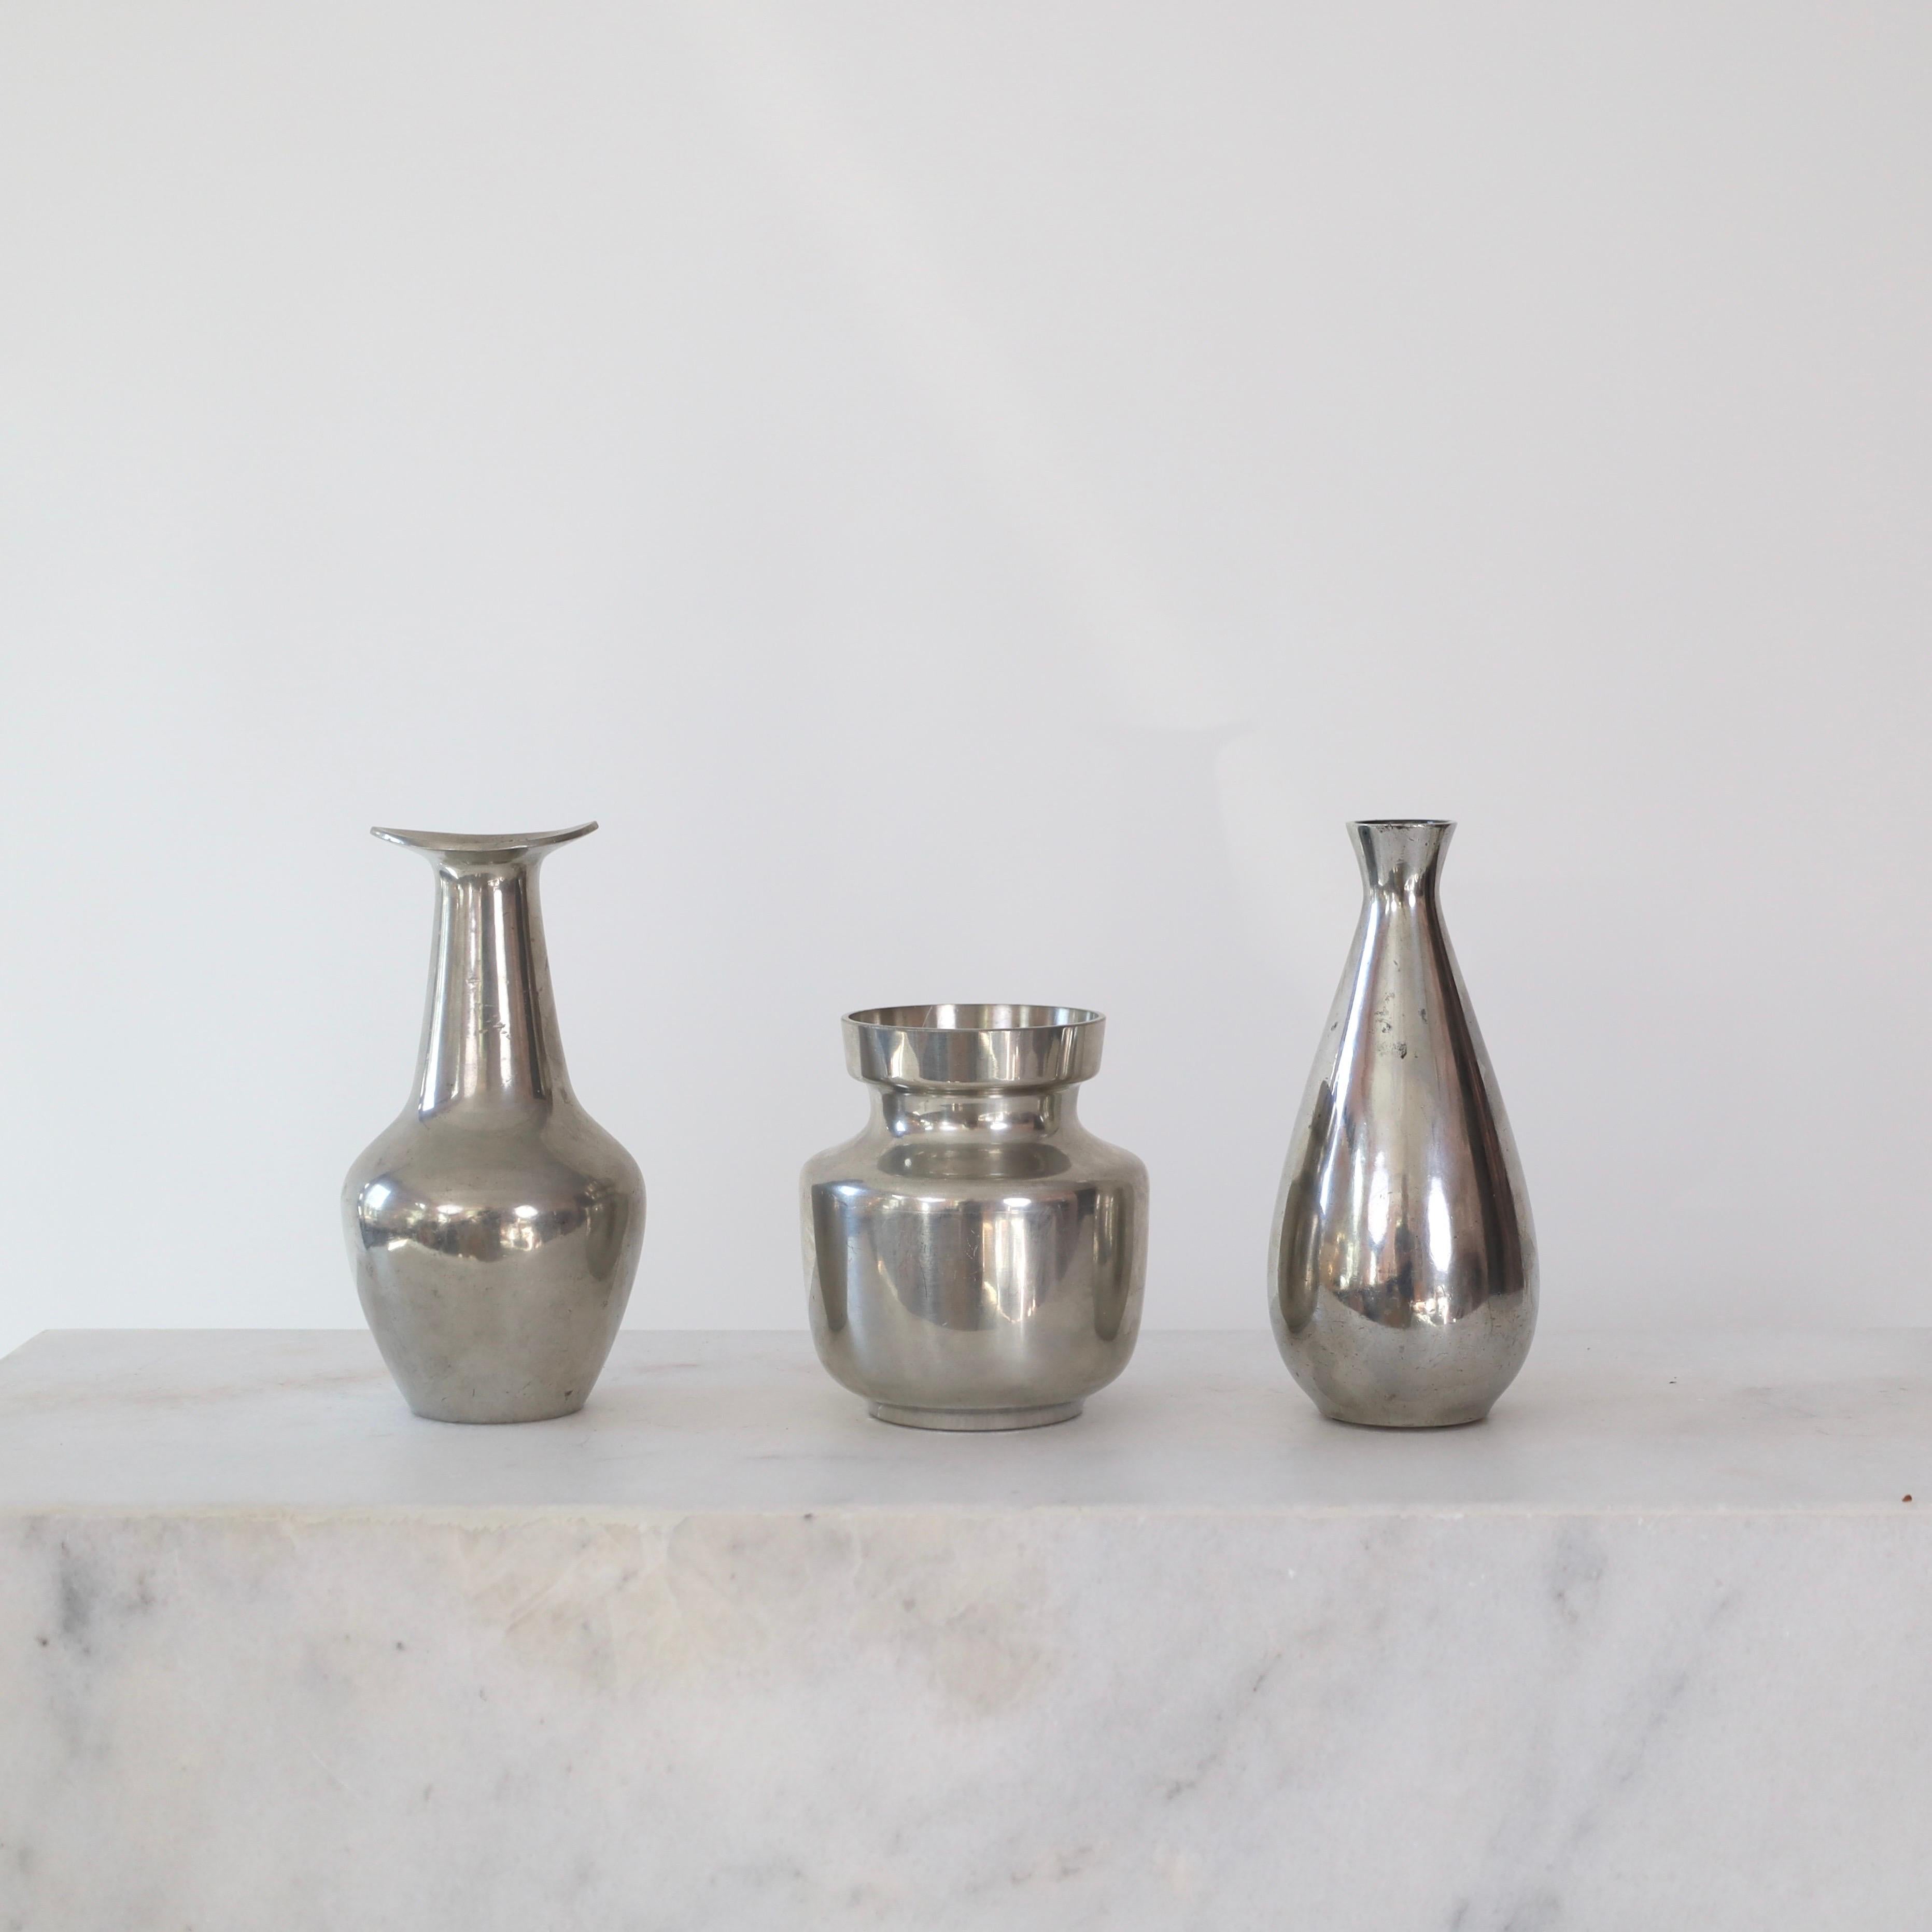 Set of three pewter vases made by Just Andersen in the 1950s. A fine trio for a beautiful home.

* Set (3) different pewter vases - two bottle shaped and one round.
* Style: 2721, 2727 and 2762
* Manufacturer: Just Andersen
* Year: 1950s
*